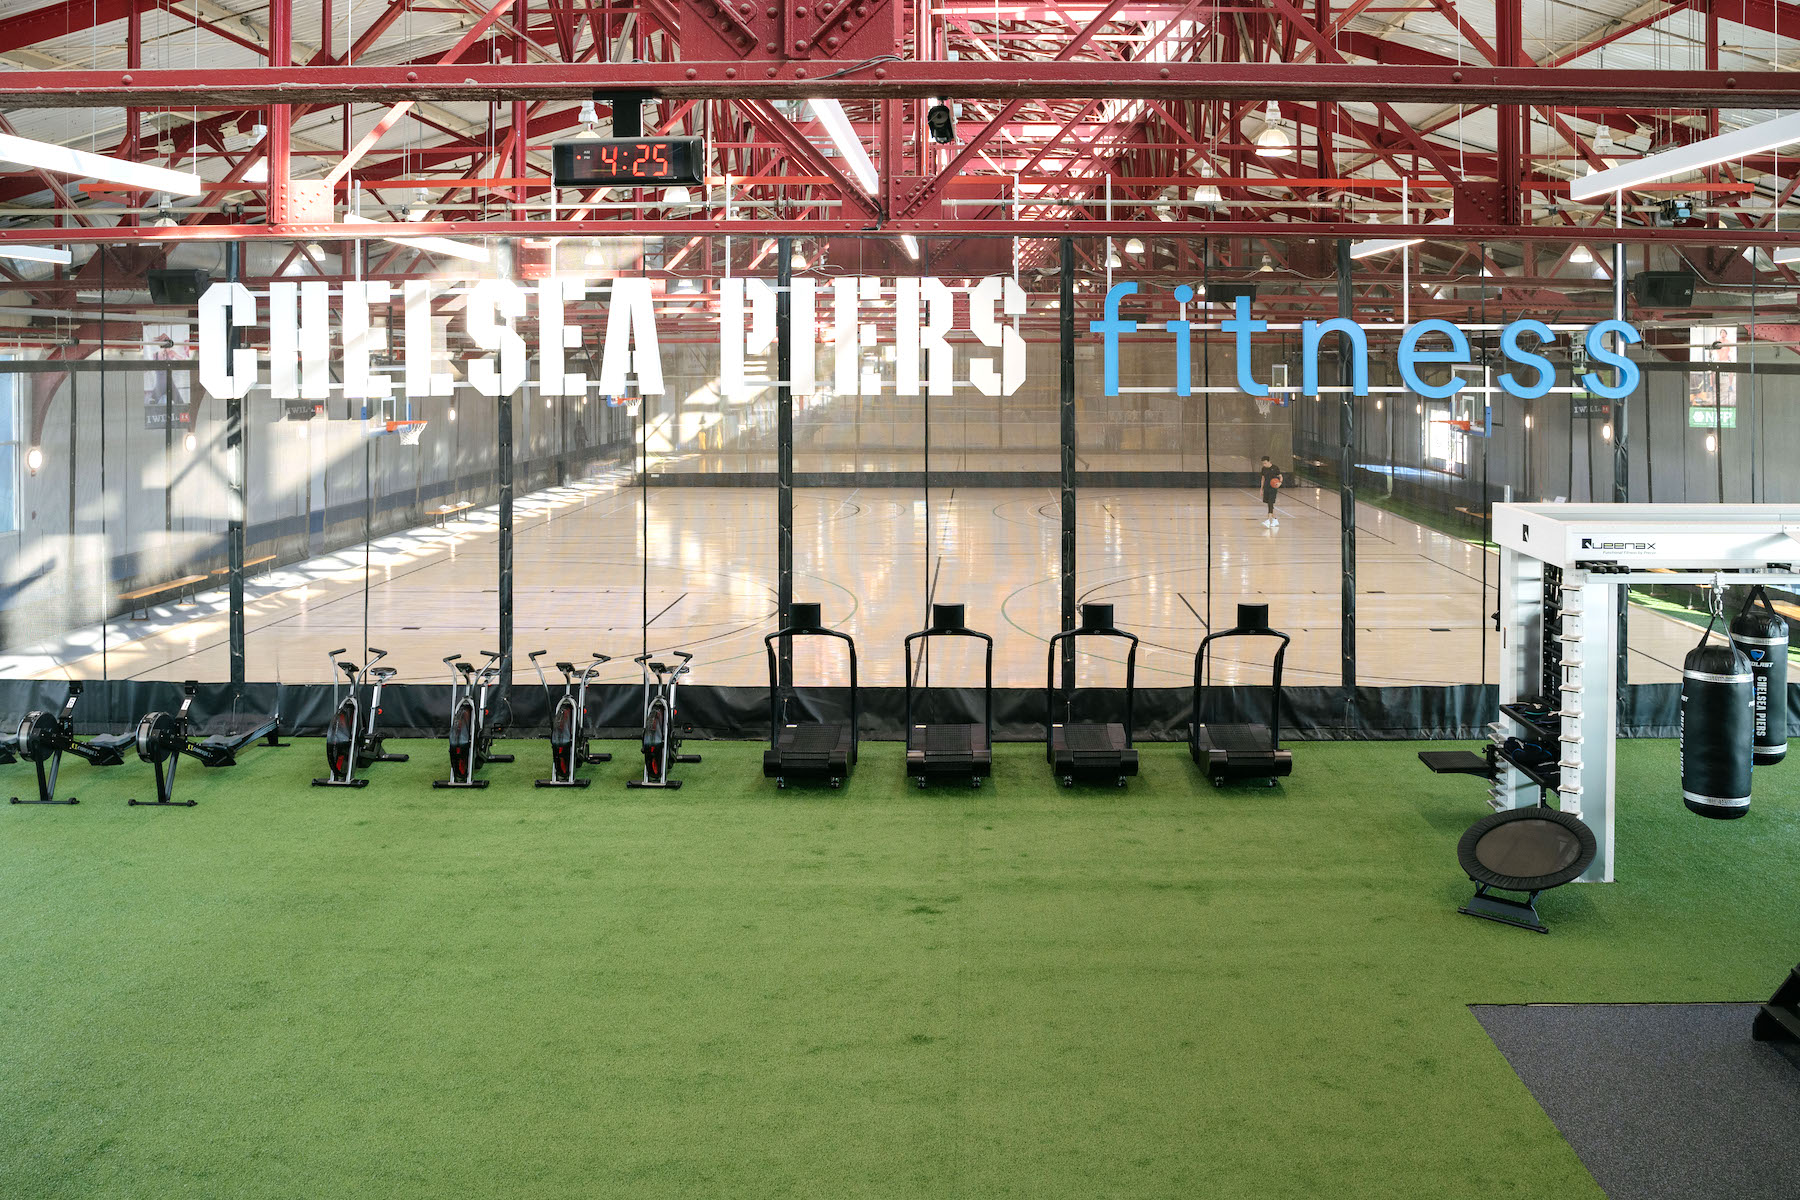 Chelsea Piers Fitness NYC turf